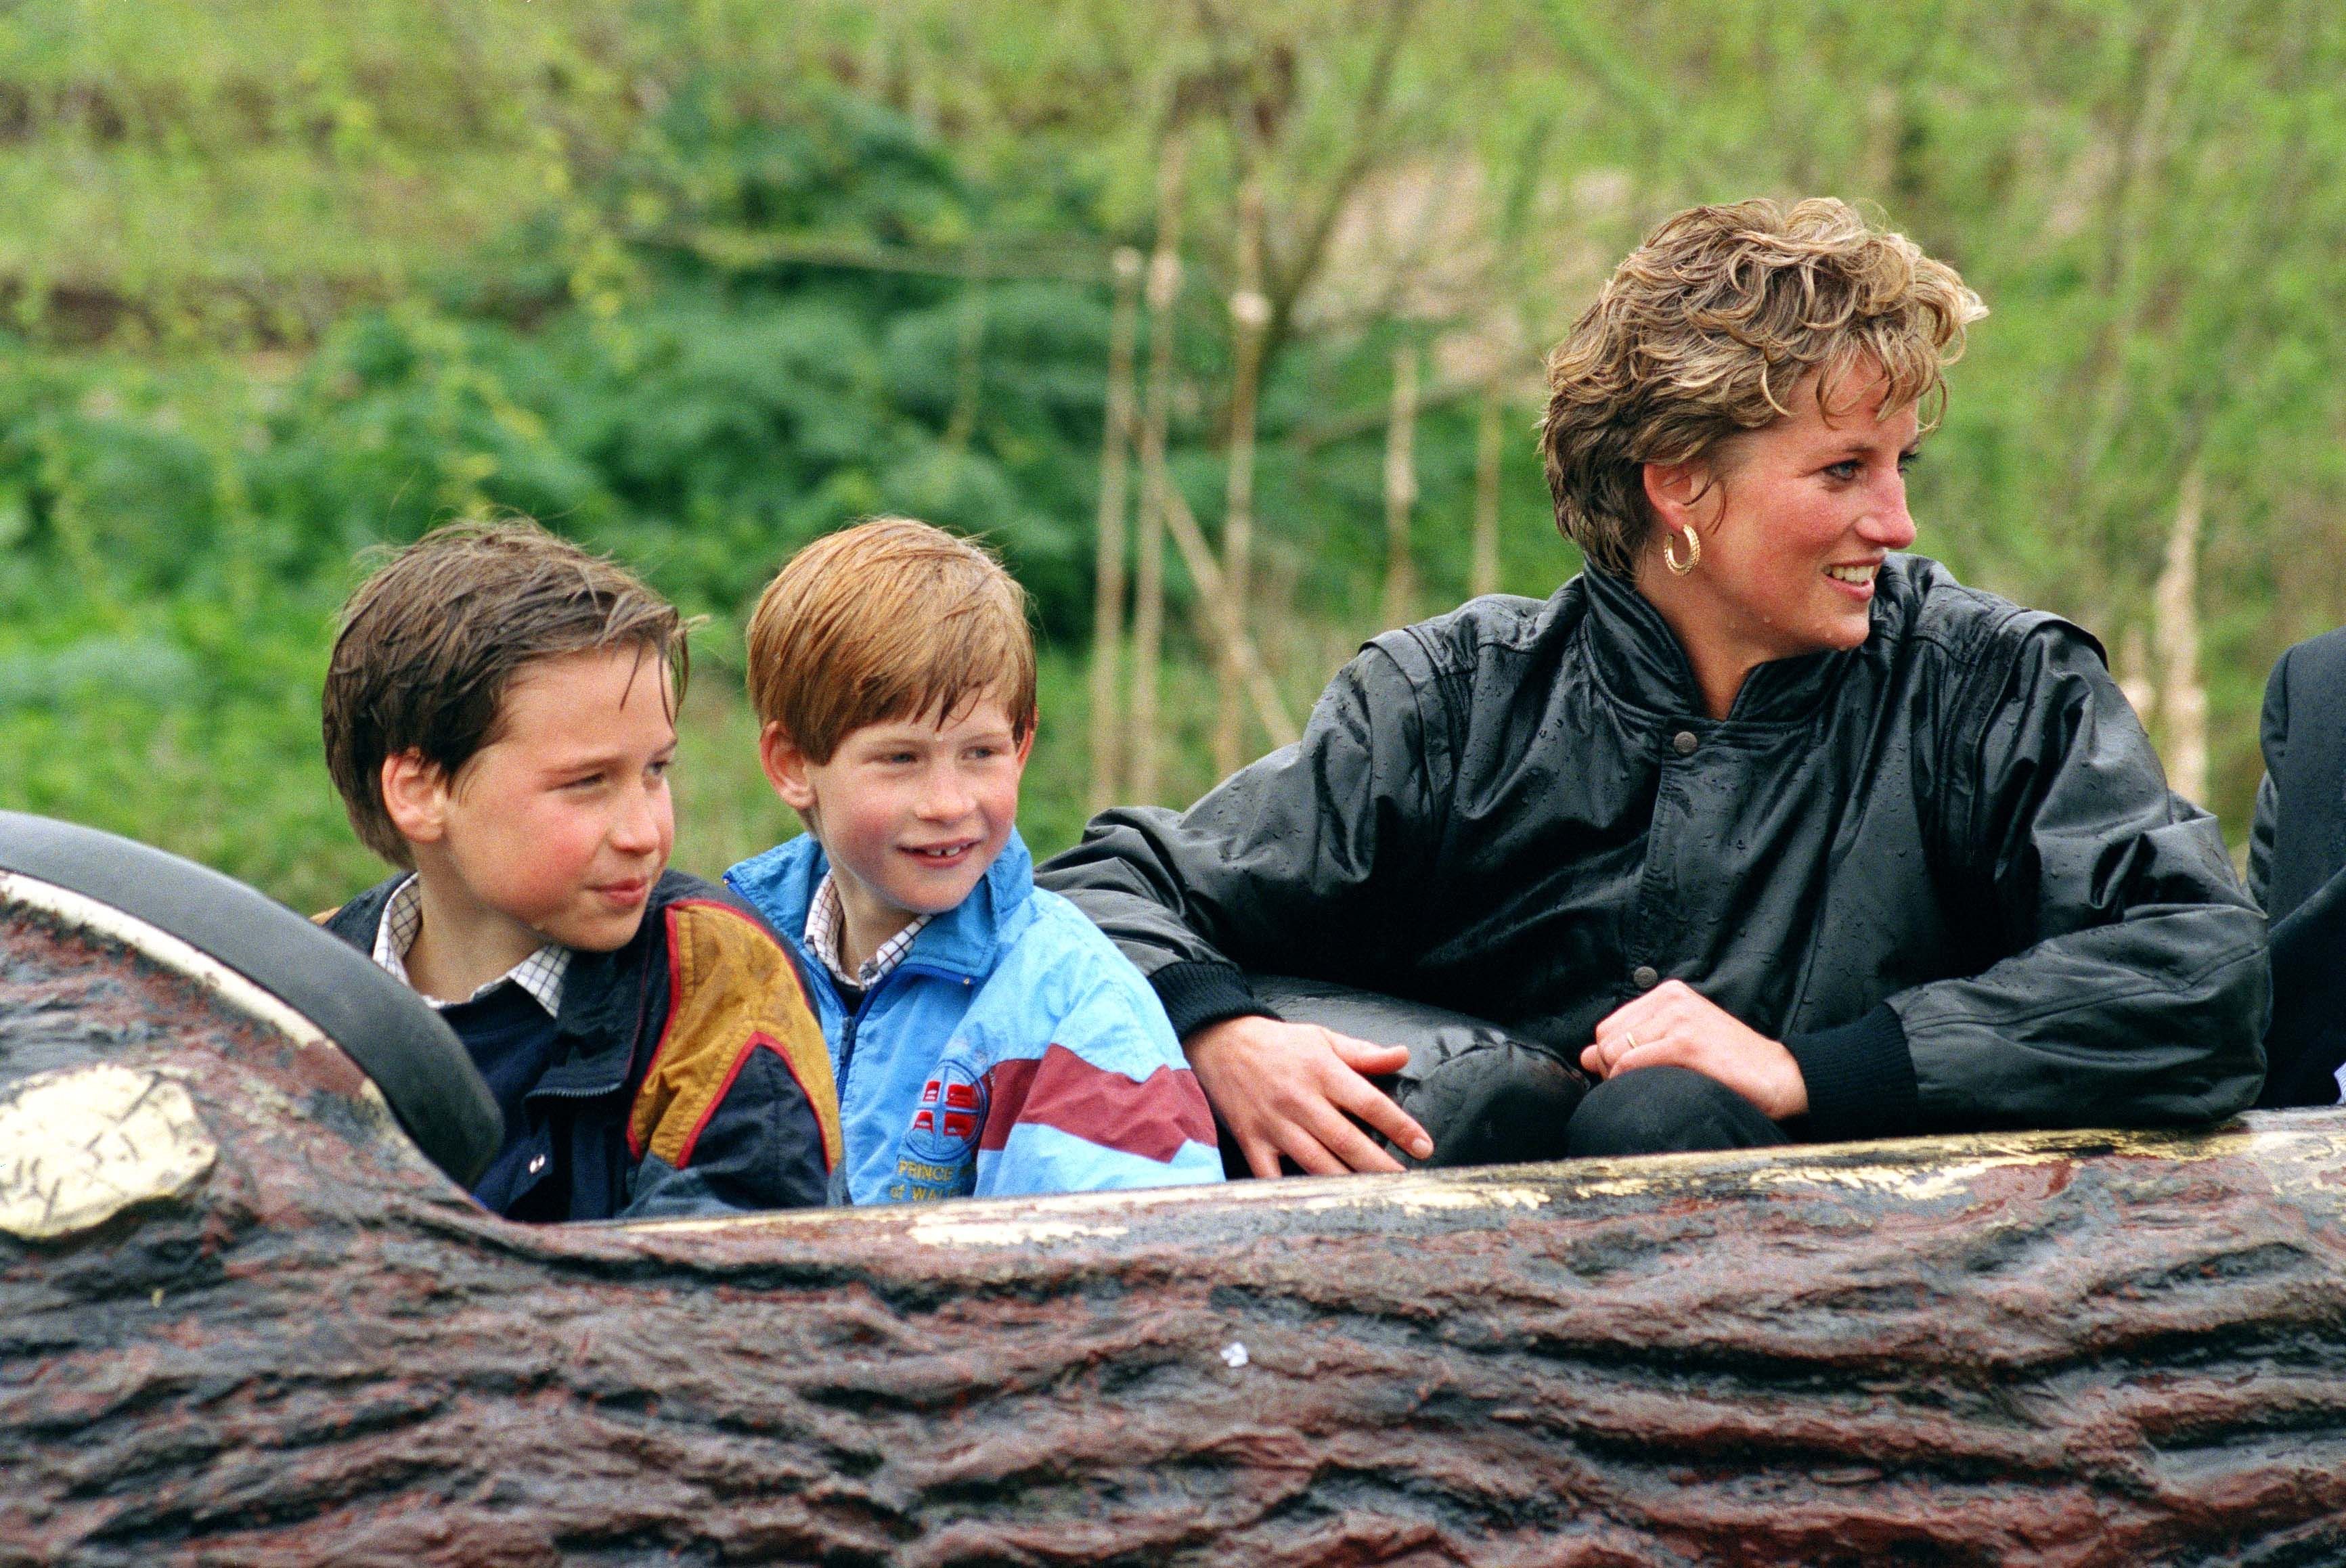 Diana Princess and sons Prince William and Prince Harry at The 'Thorpe Park' Amusement Park on April 13, 1993 | Photo: Antony Jones/UK Press/Getty Images